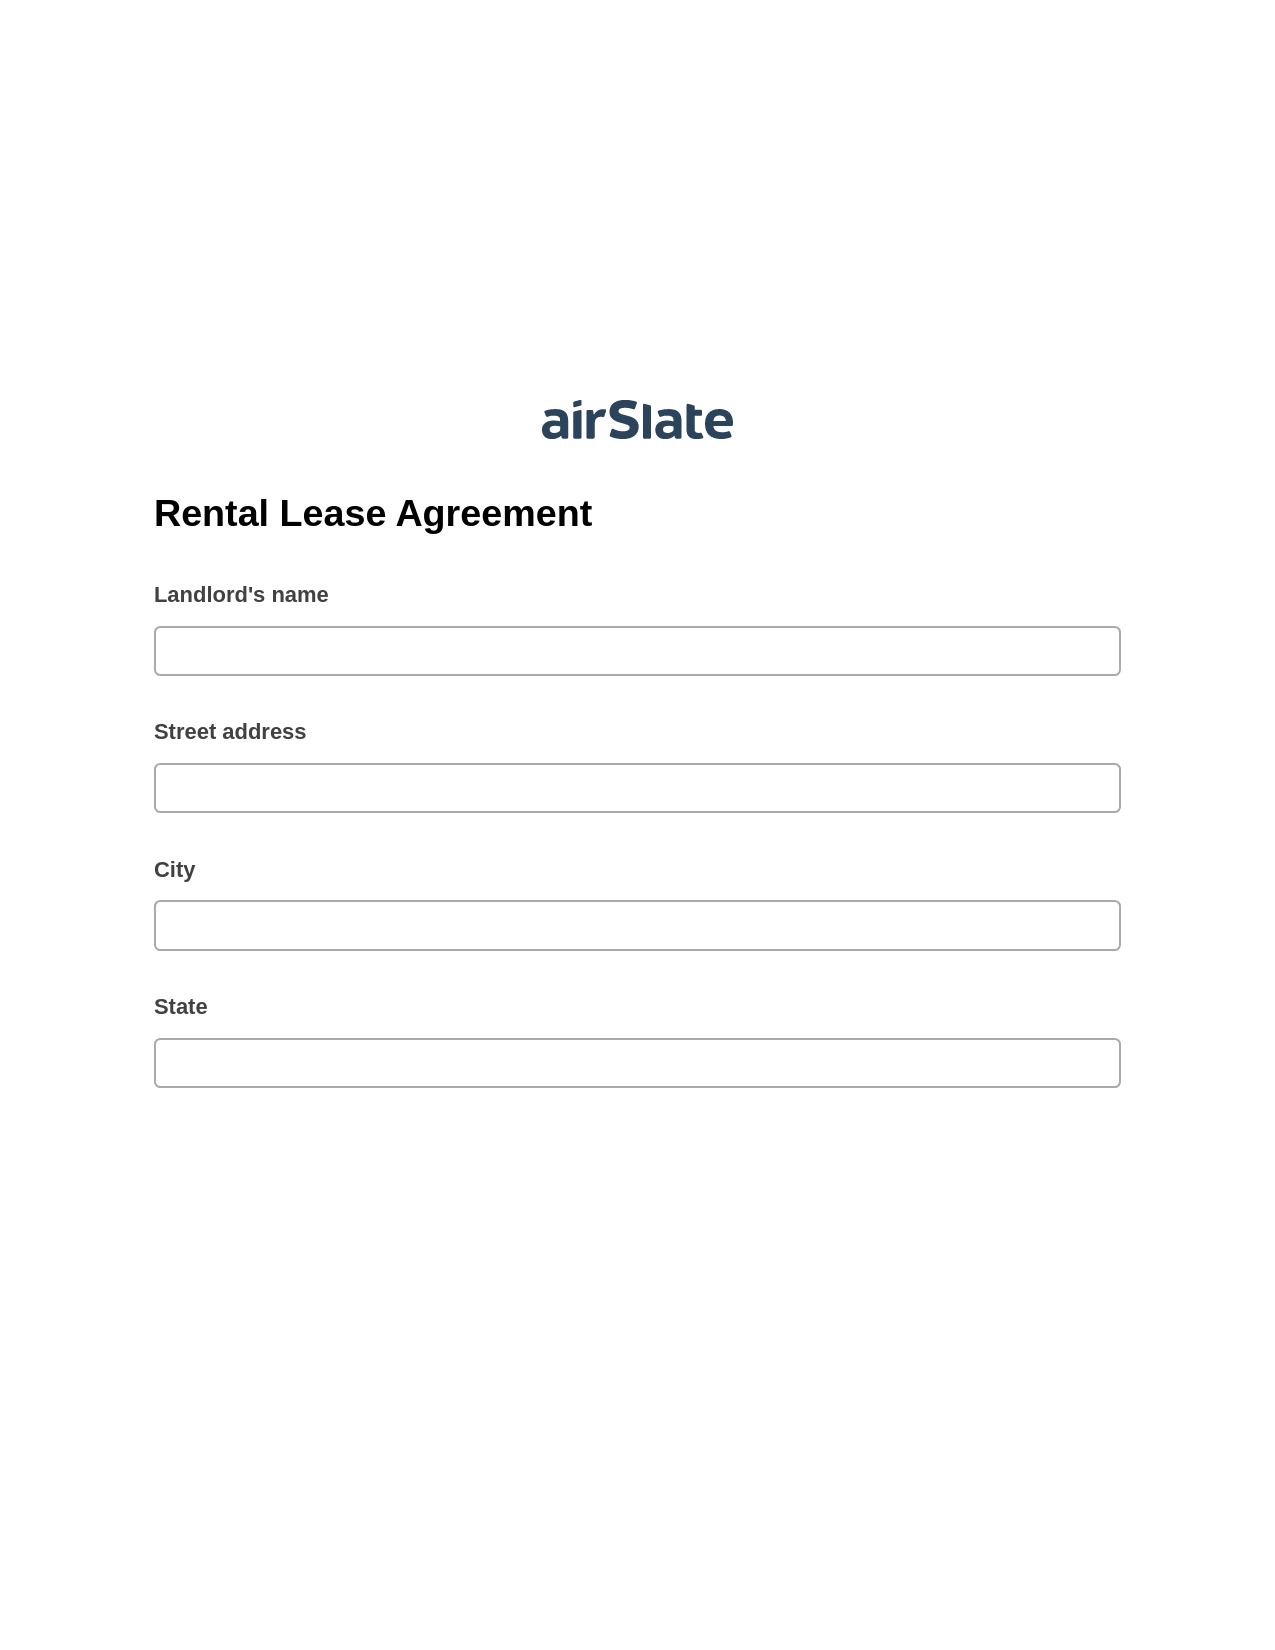 Rental Lease Agreement Pre-fill from Excel Spreadsheet Dropdown Options Bot, Set signature type addon, Export to MySQL Bot